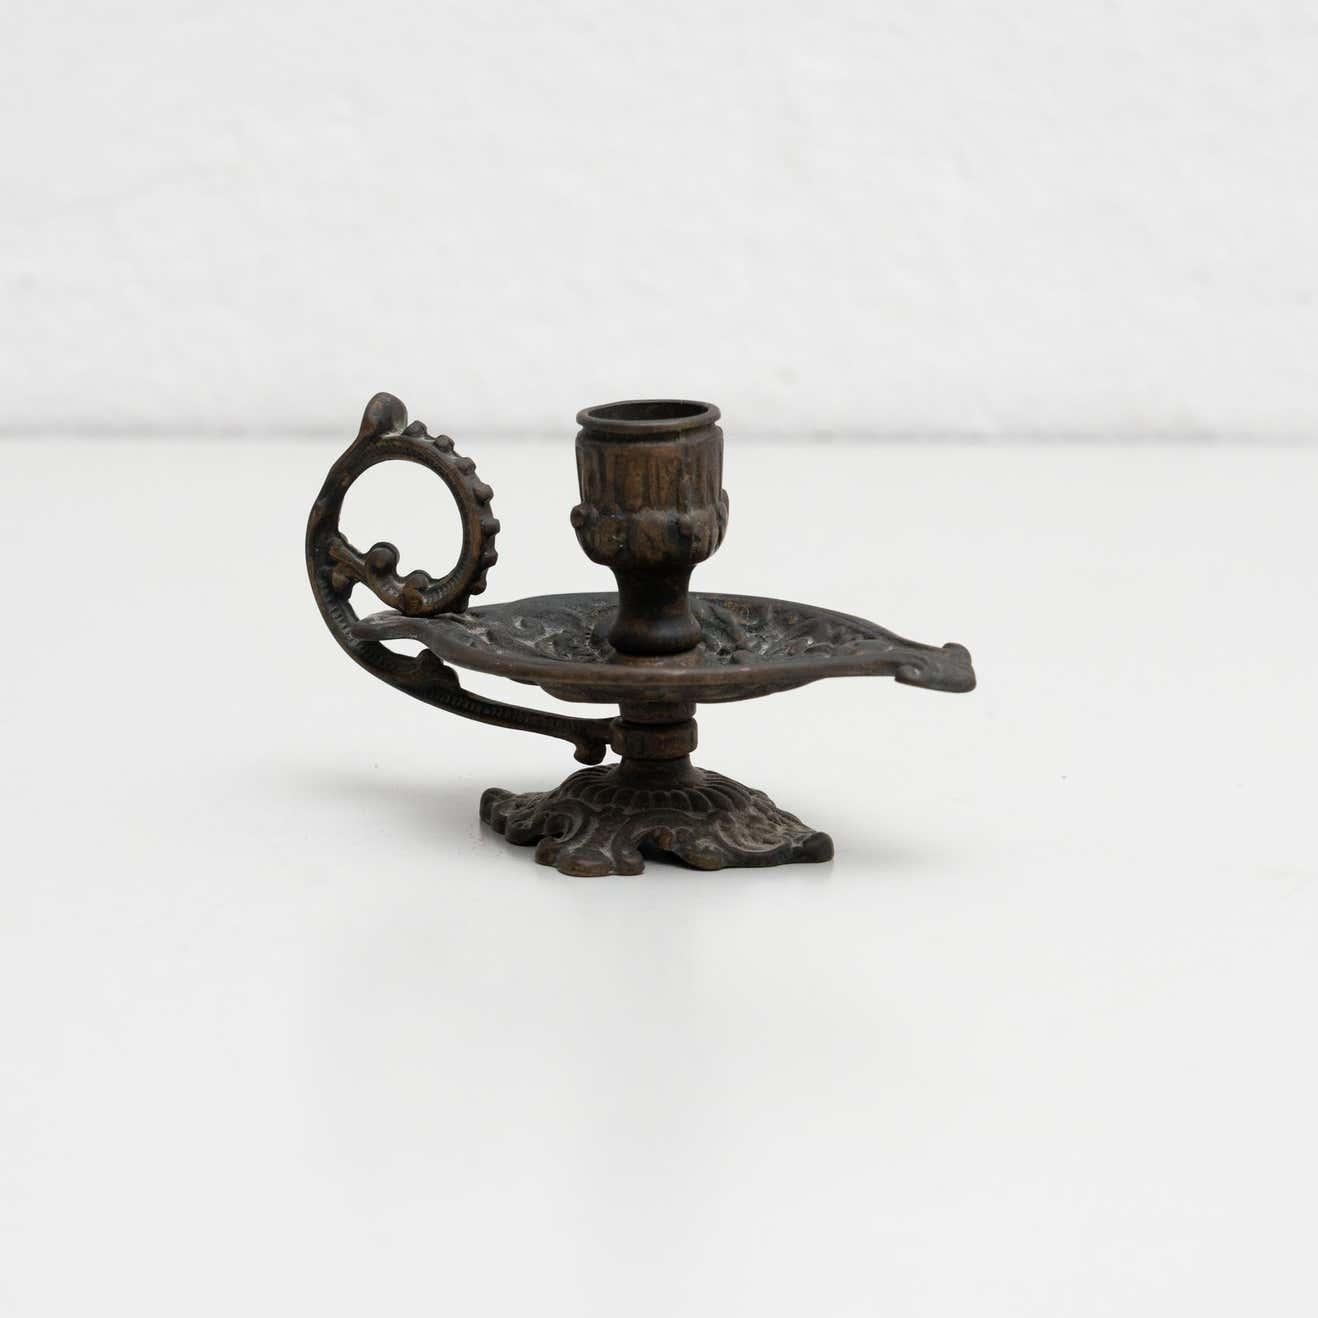 Rustic metal candle holder, circa 1950
By unknown manufacturer. Spain

In original condition, with minor wear consistent with age and use, preserving a beautiful patina.
  
Material:
Metal.

